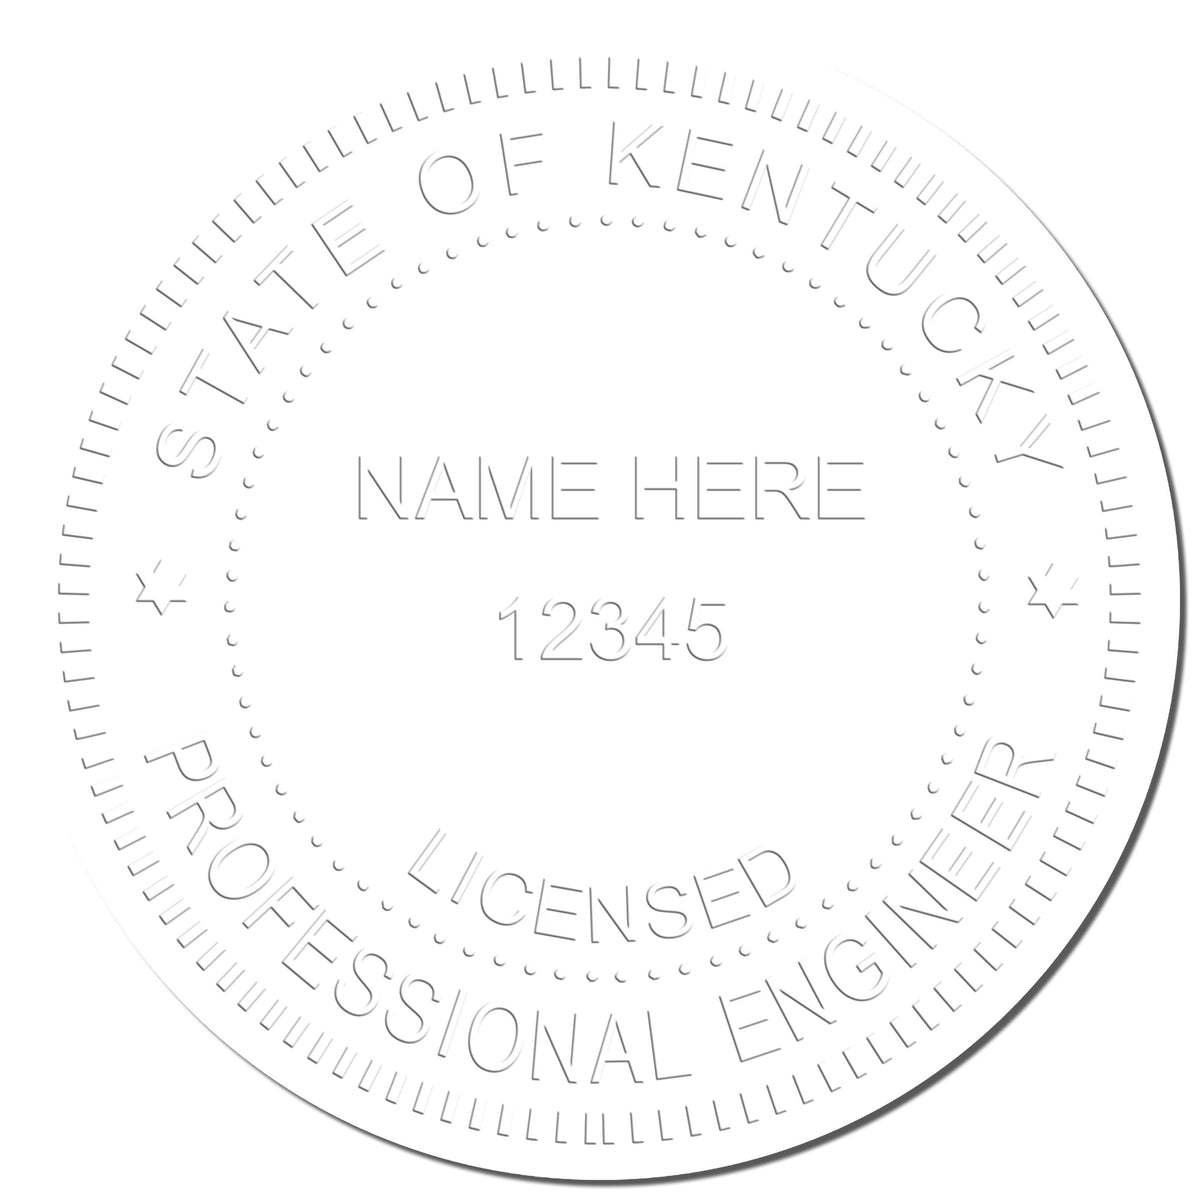 The Soft Kentucky Professional Engineer Seal stamp impression comes to life with a crisp, detailed photo on paper - showcasing true professional quality.